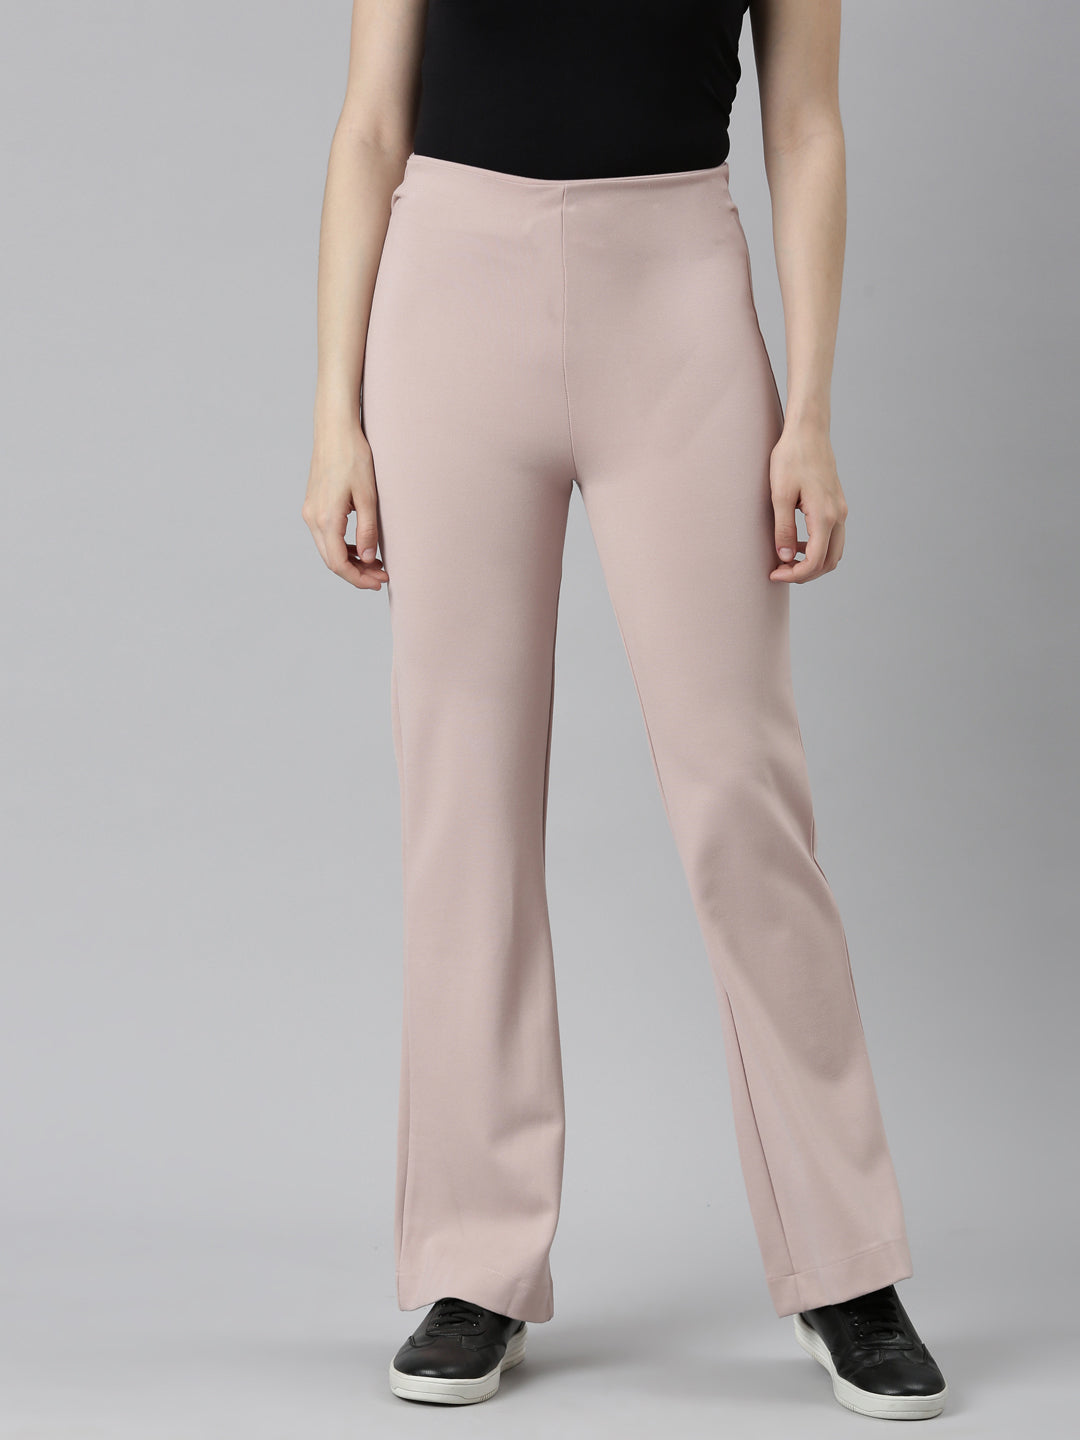 Zara baby pink flared Wide Leg Trousers Xs Party Work Holiday | eBay